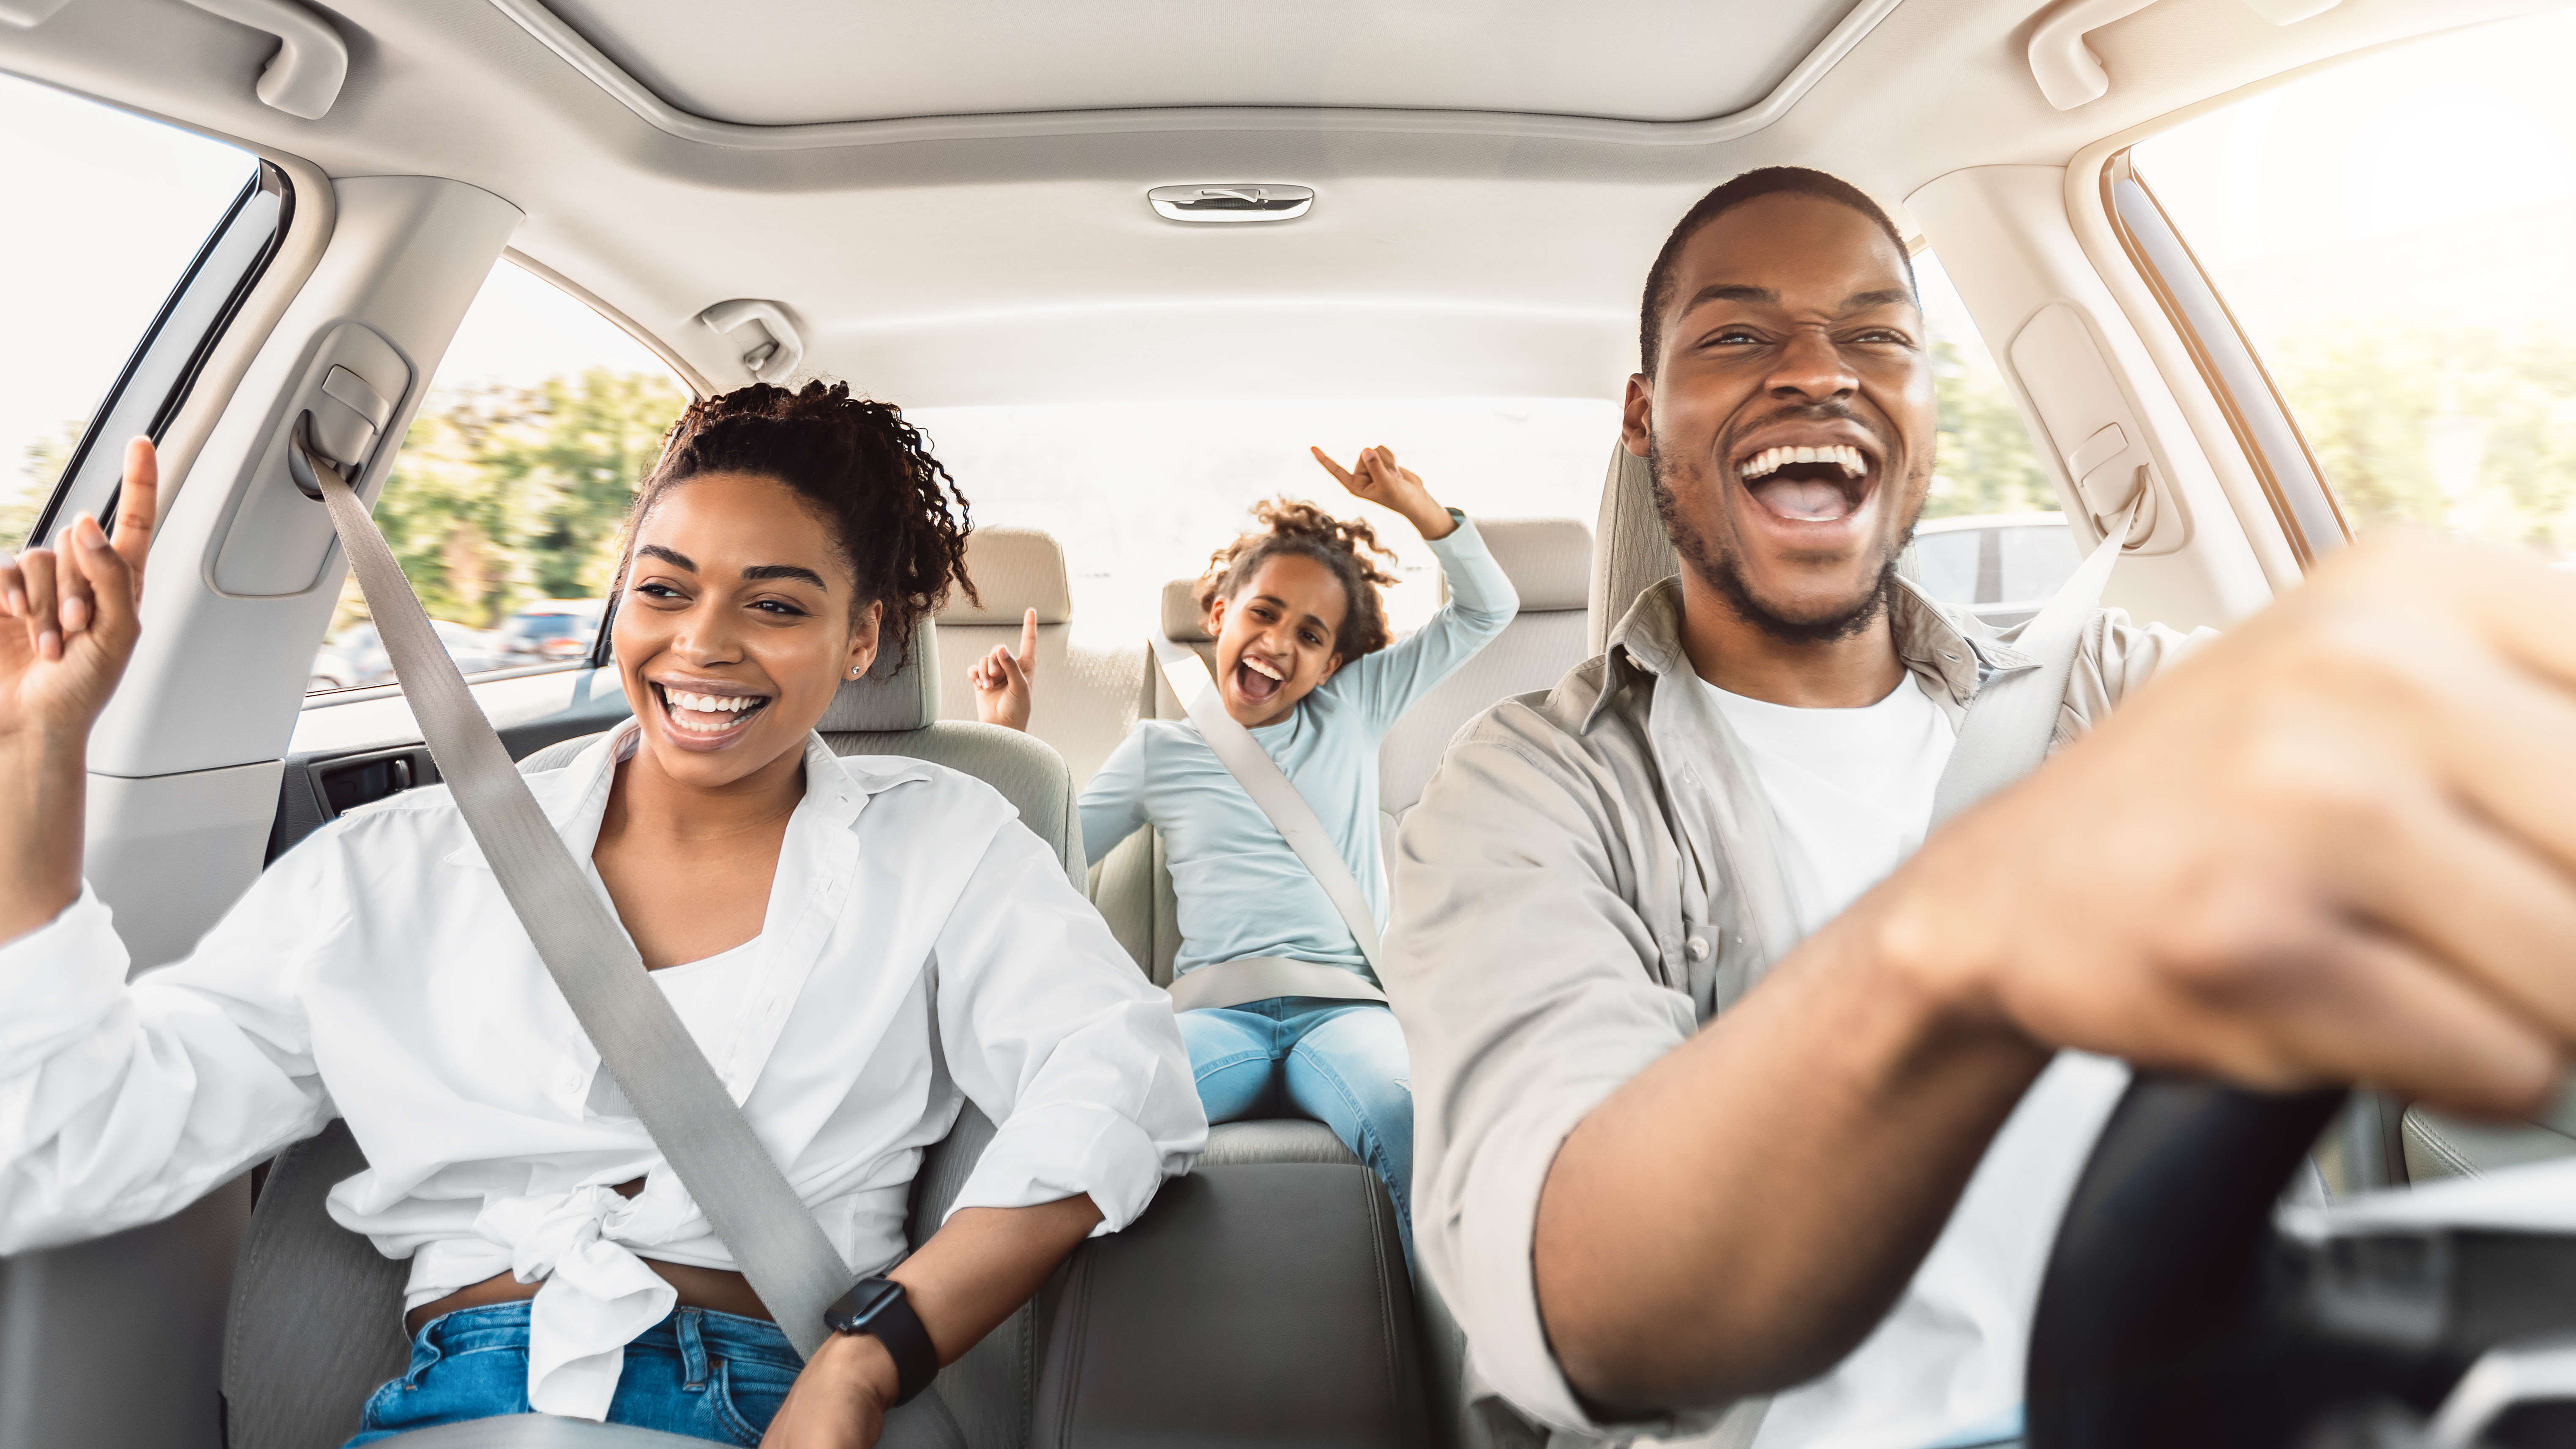 Safe Auto Insurance Review 11: Pros and Cons - NerdWallet